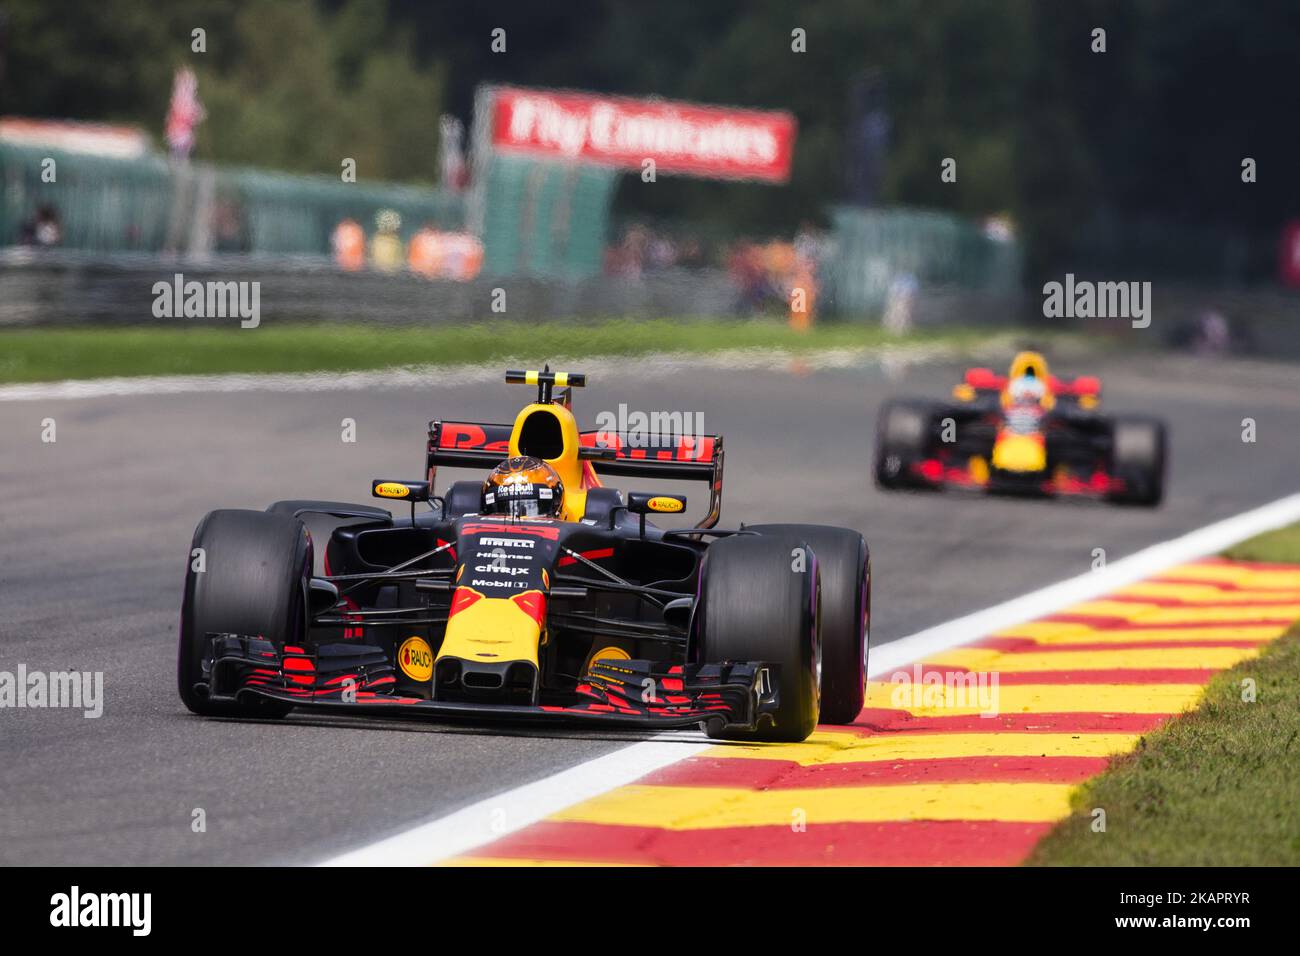 33 VERSTAPPEN Max from Nederlans of Red Bull Tag Heuer during the Formula One Belgian Grand Prix at Circuit de Spa-Francorchamps on August 27, 2017 in Spa, Belgium. (Photo by Xavier Bonilla/NurPhoto) Stock Photo